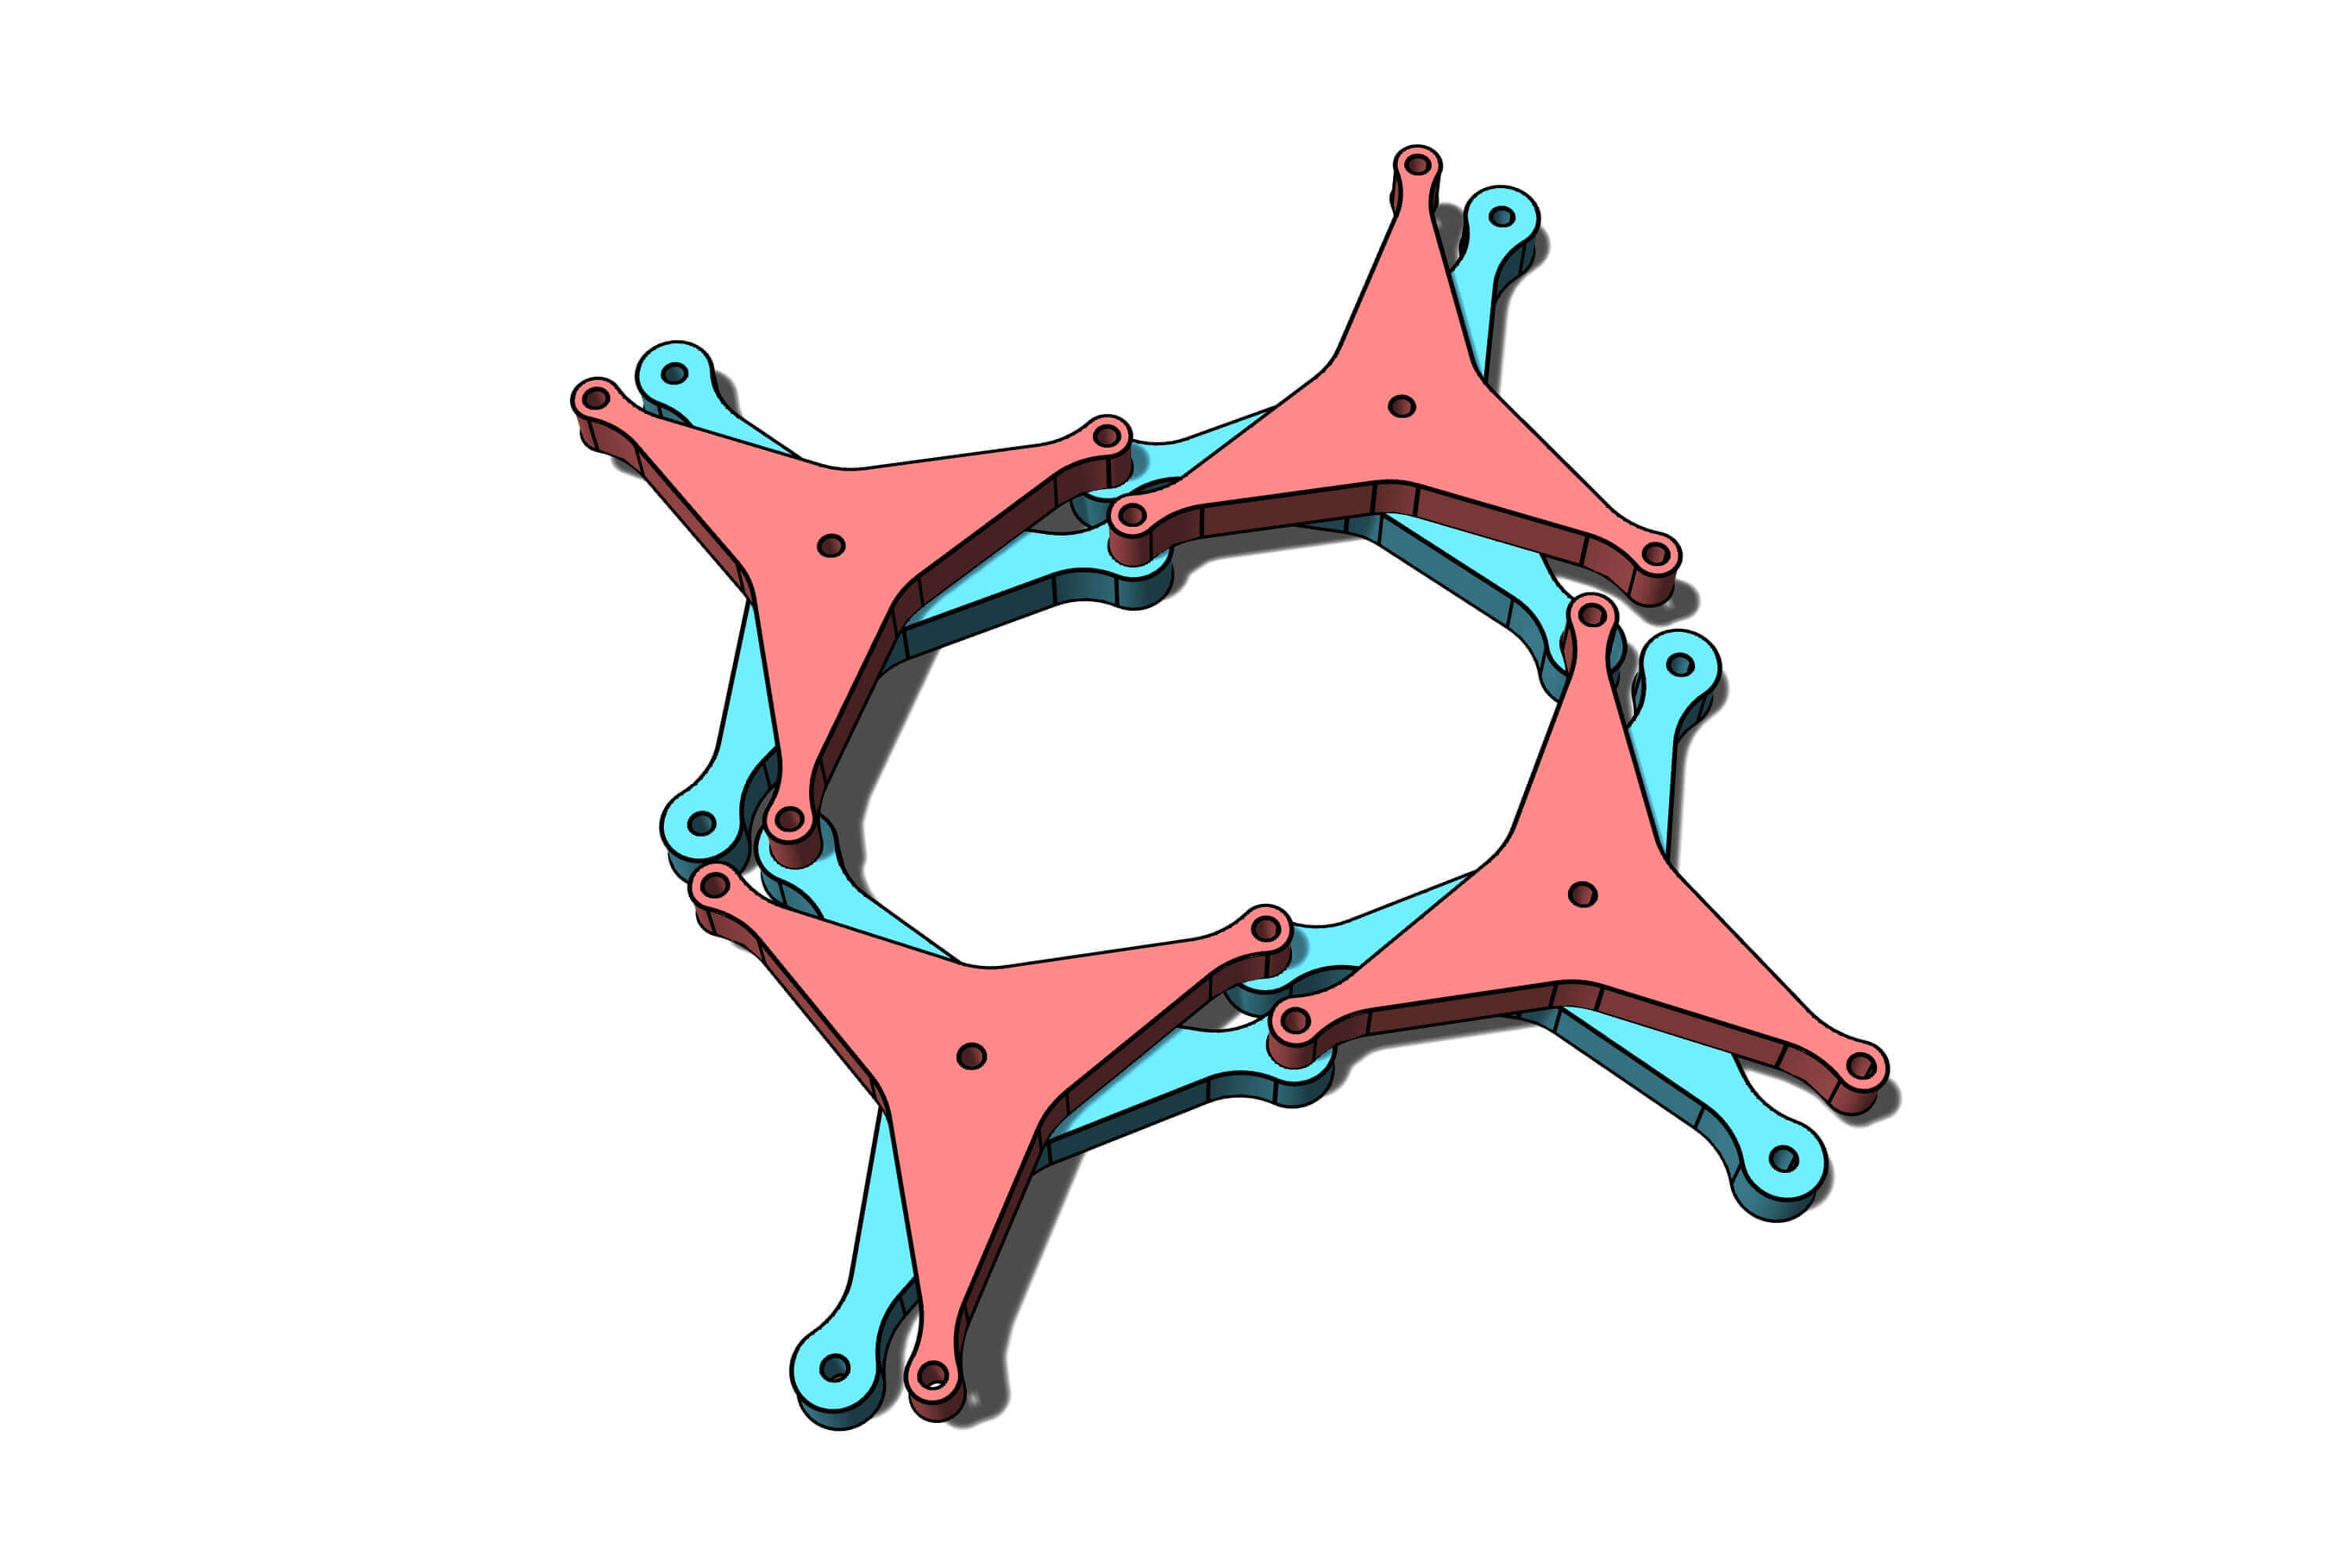 Two layer Mechanism